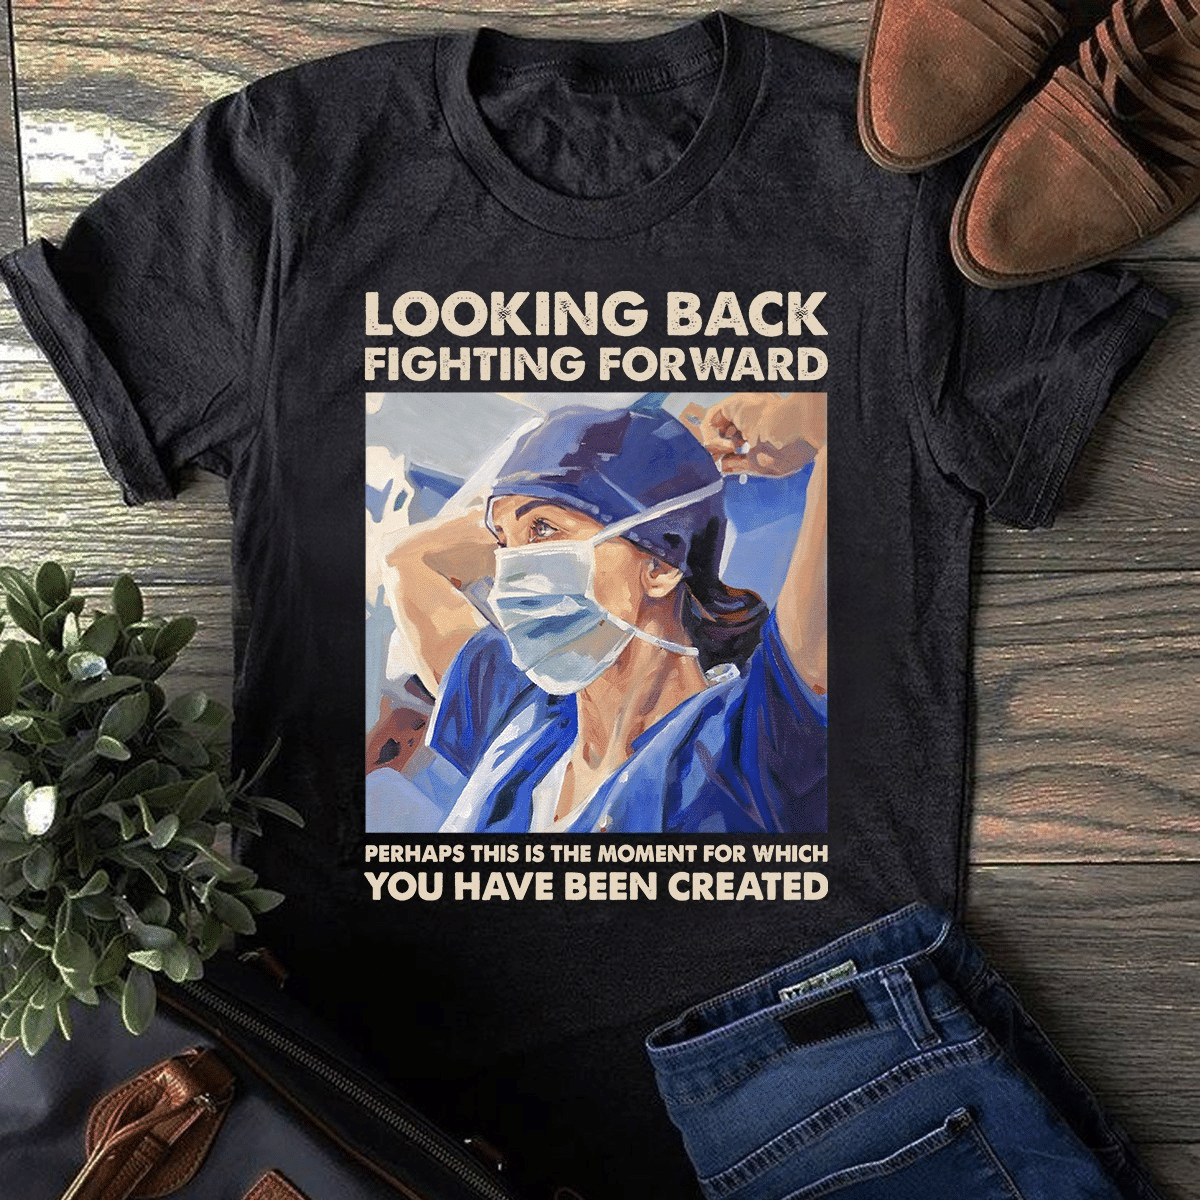 PresentsPrints, Nurse's day nurse warrior looking back fighting forward perhaps this is the moment for which you have been created, Nurse T-Shirt